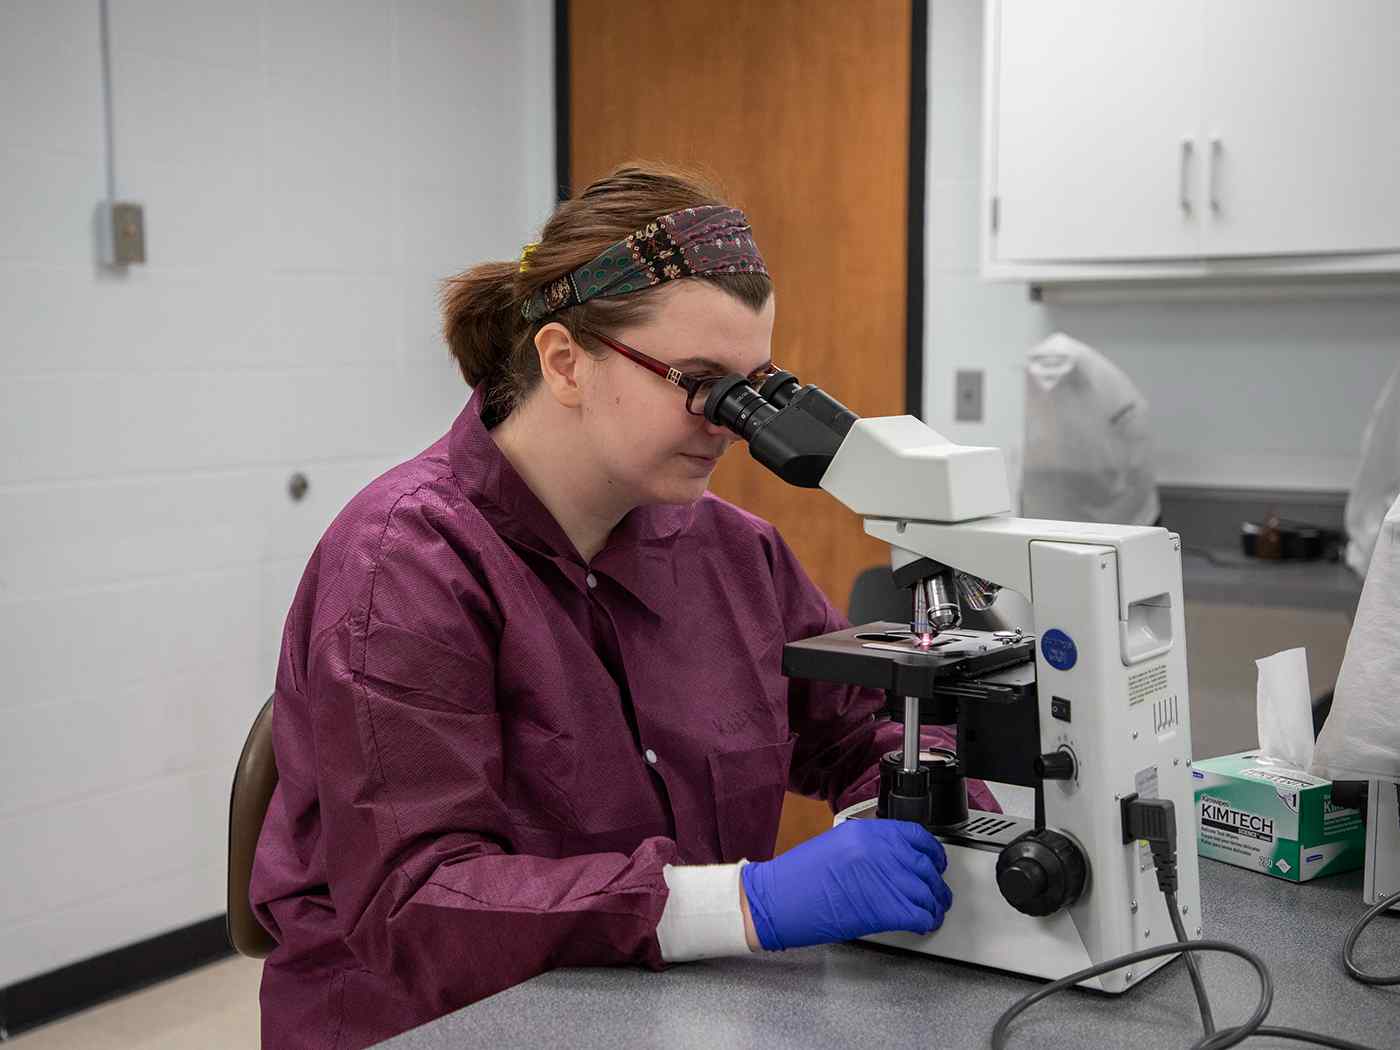 A student examines a sample under a microscope